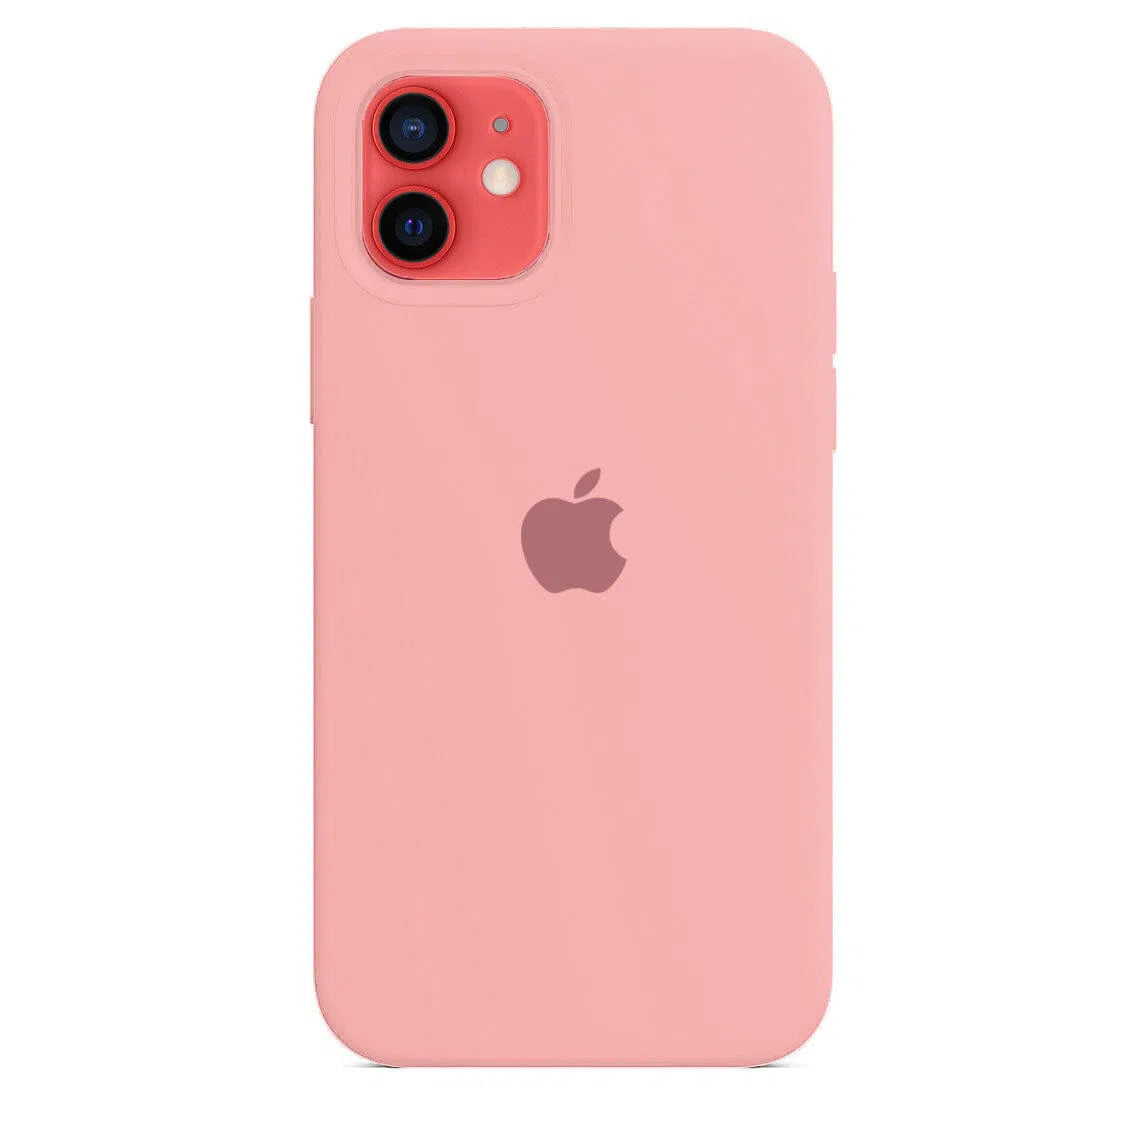 Husa iPhone Silicone Case Baby Pink (Roz) Anca's Store 12 mini 